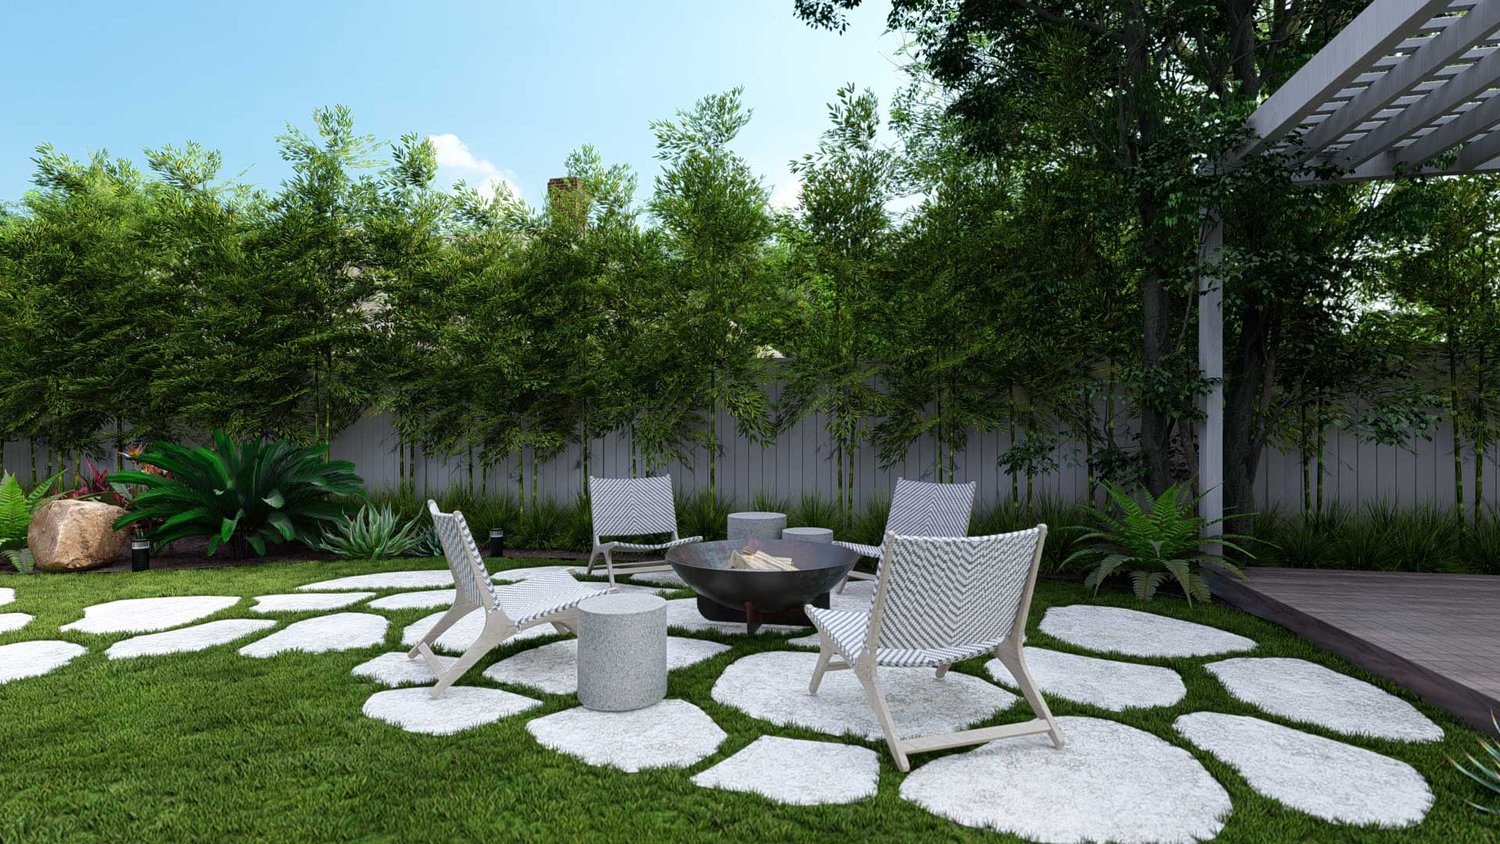 Tampa backyard concrete paver patio in lawn, with fire pit seating area